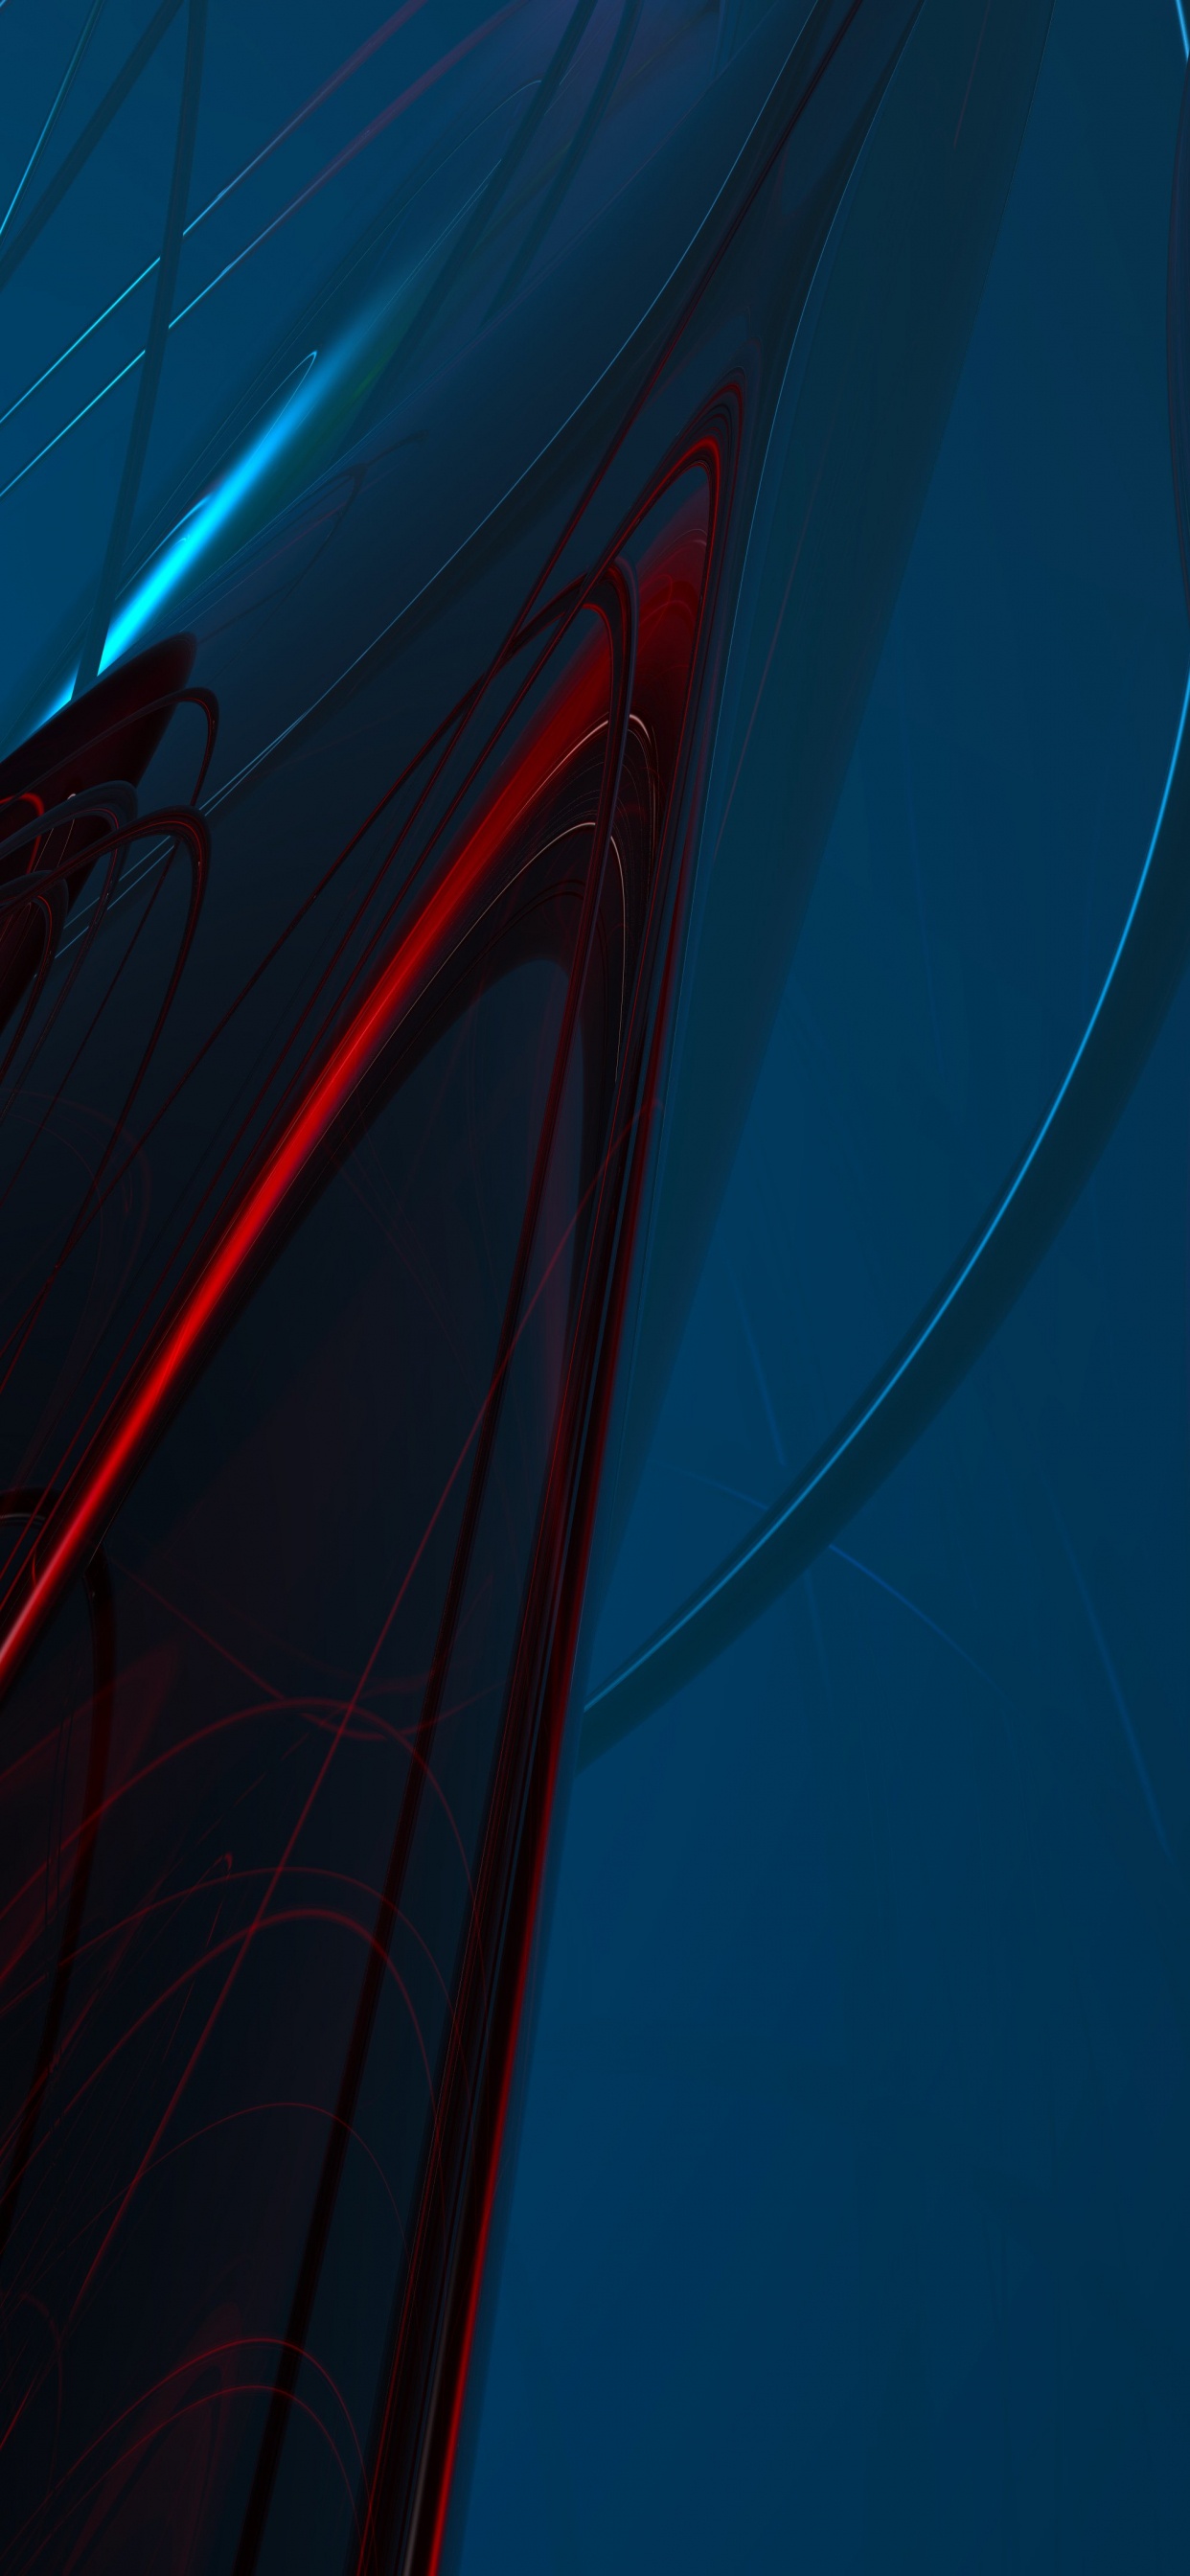 Blue and Red Light Streaks. Wallpaper in 1242x2688 Resolution